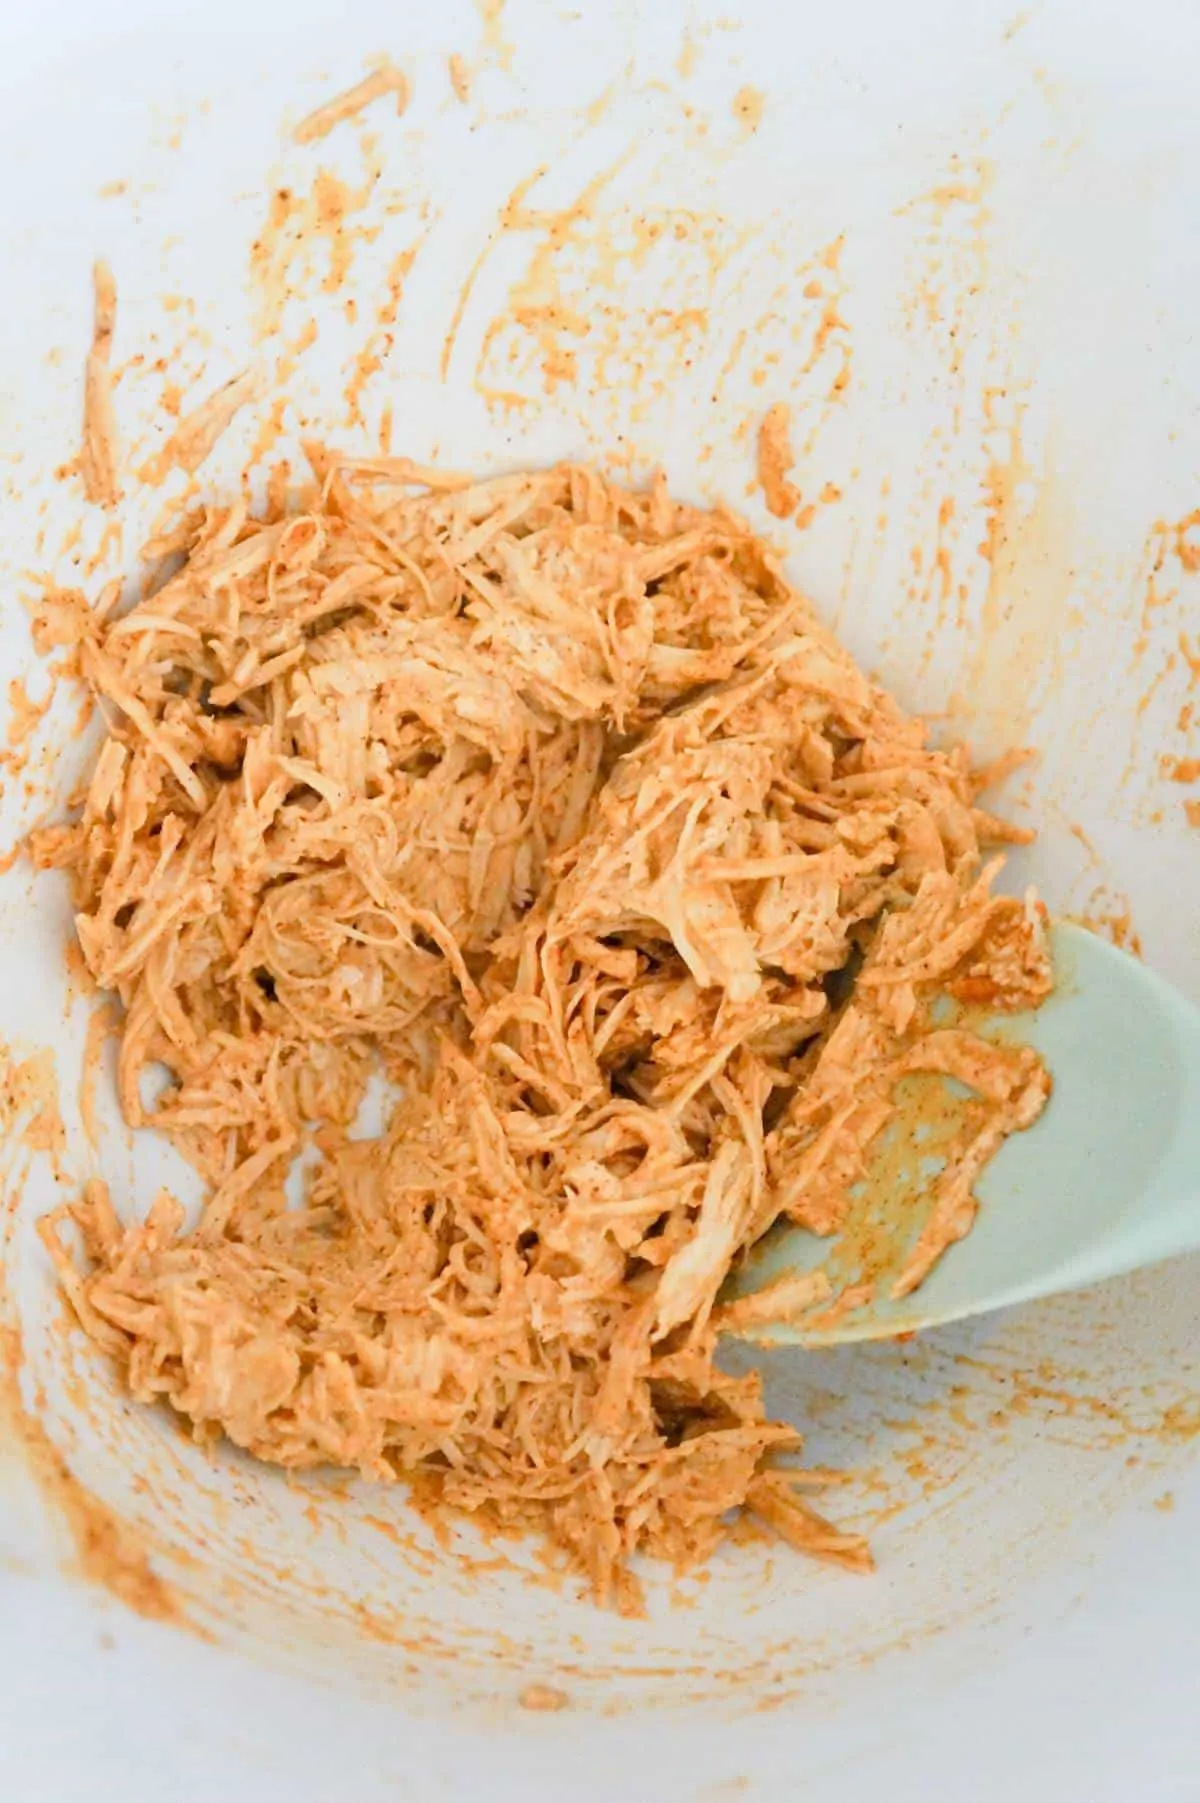 shredded chicken, mayo and taco seasoning mixture in a mixing bowl